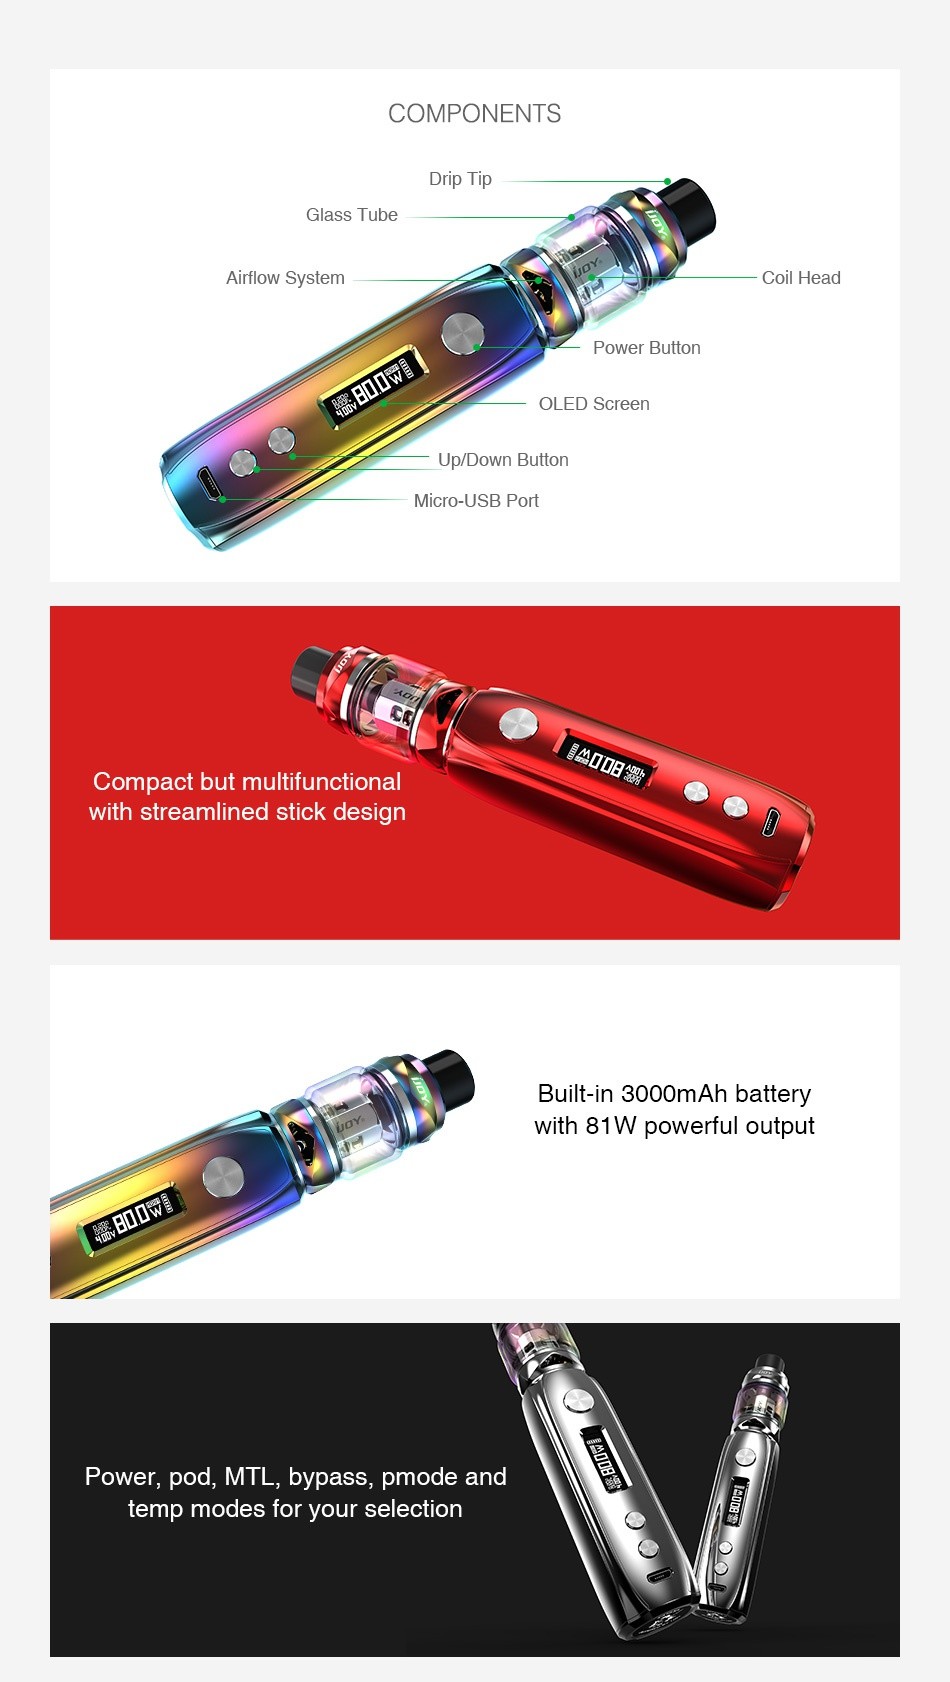 IJOY Katana 81W TC Kit 3000mAh COMPONENTS Glass Tub Airflow System Coil Head Power button OLED Scree Up Down Button Micro USB Port Compact but multifunctional with streamlined stick desig Built in 3000mAh battery With 81W powerful output ower  pod  MTL  bypass  pmode and temp modes for your selection